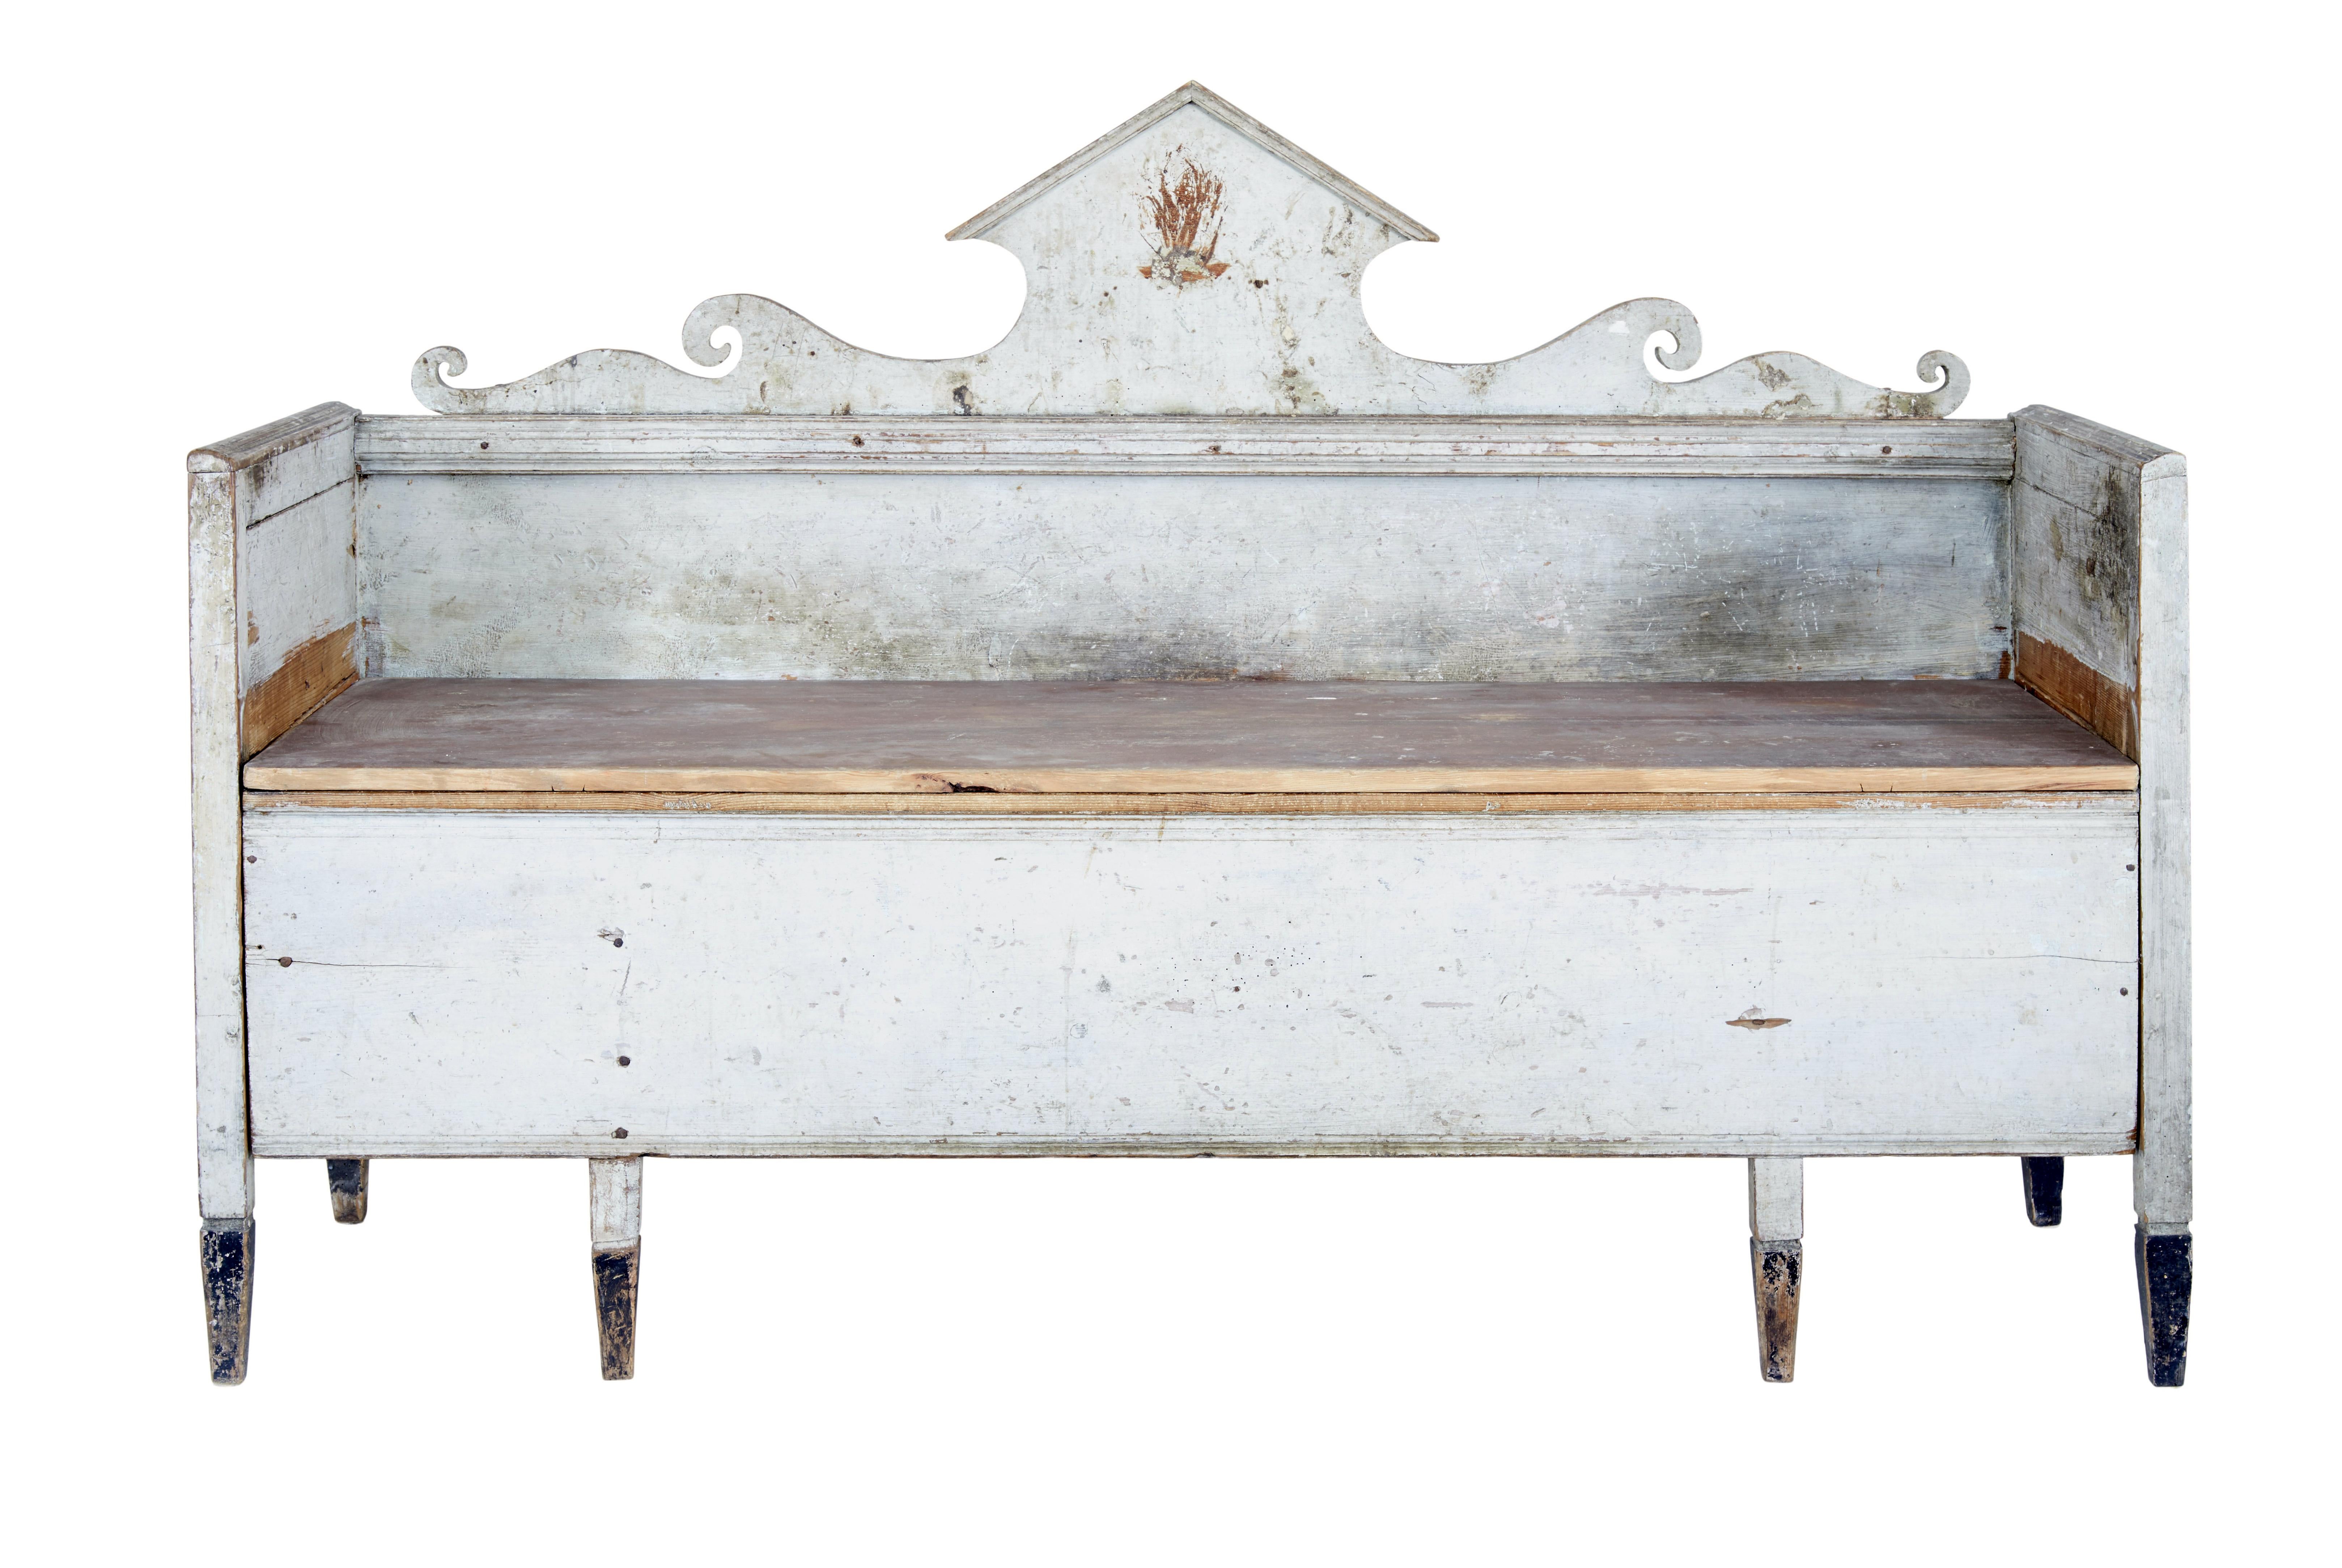 Swedish early 19th century gustavian painted sofa circa 1810.

Stunning sofa in original paint.  This would have been a day bed with a pull out section to the front, but it has since been sealed shut, this could be released if desired.

Pediment